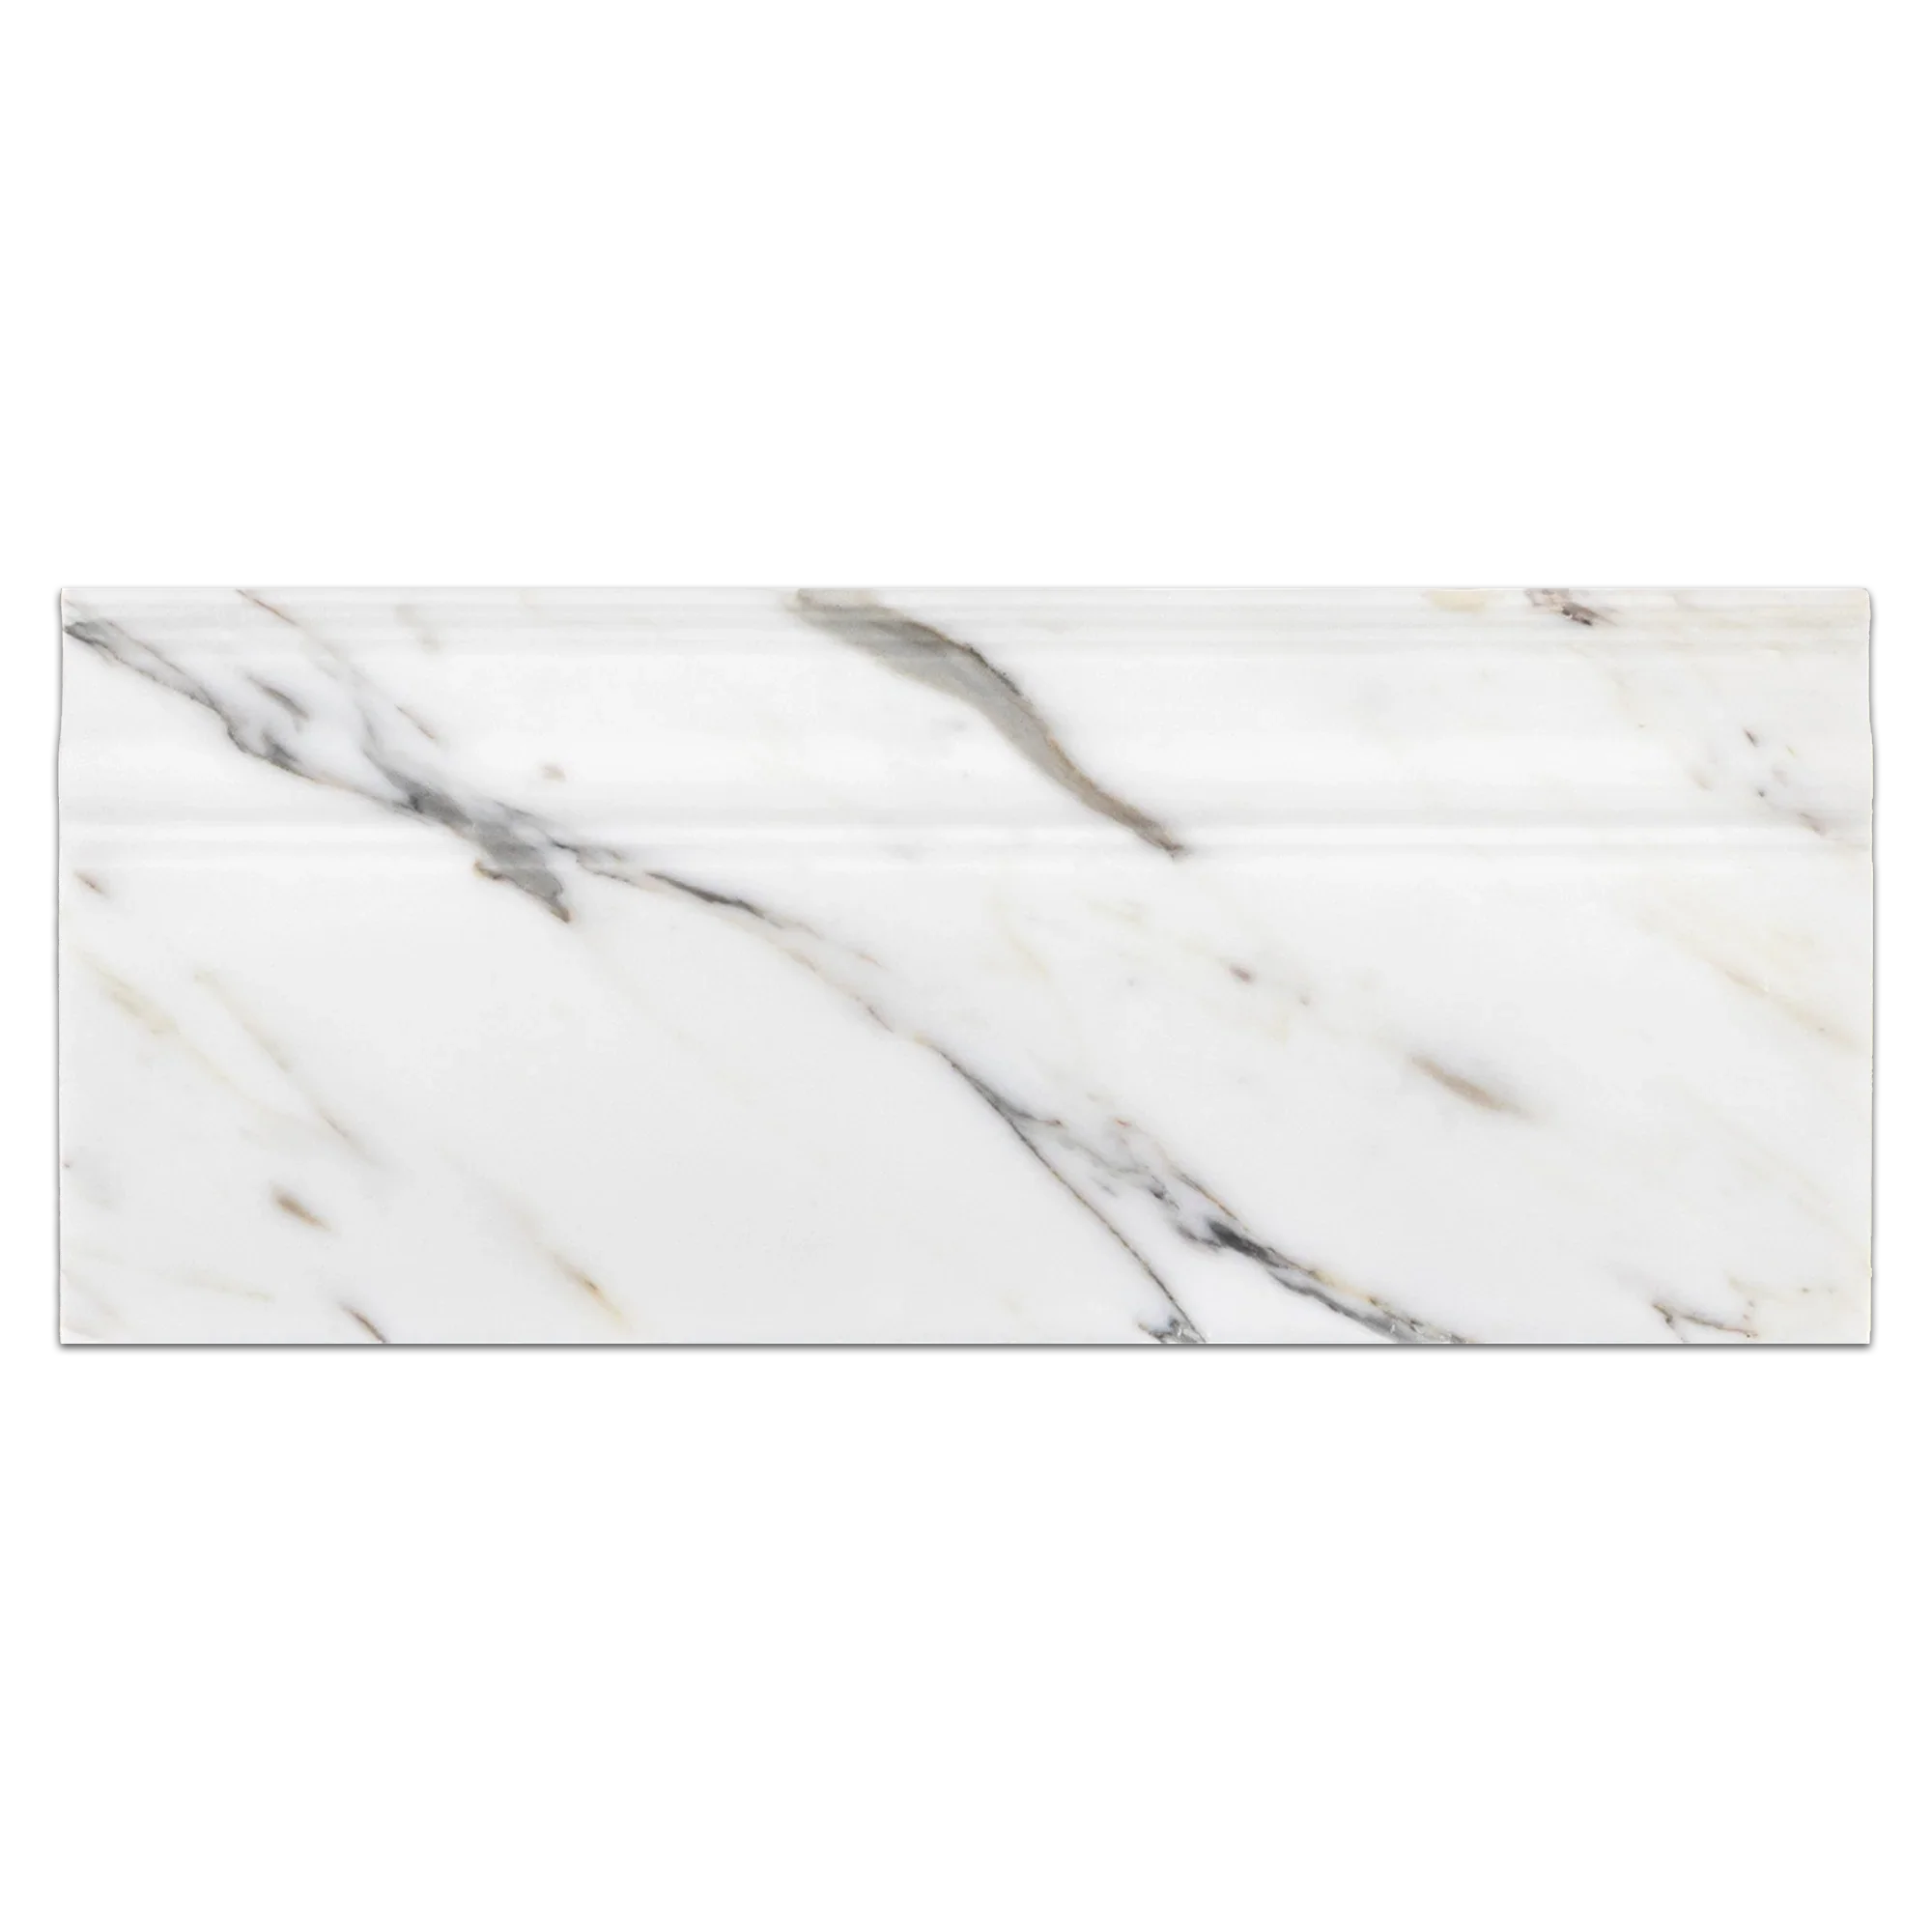 Elon Calacatta Gold Marble Baseboard 4.75x12 Polished Tile from Surface Group International.